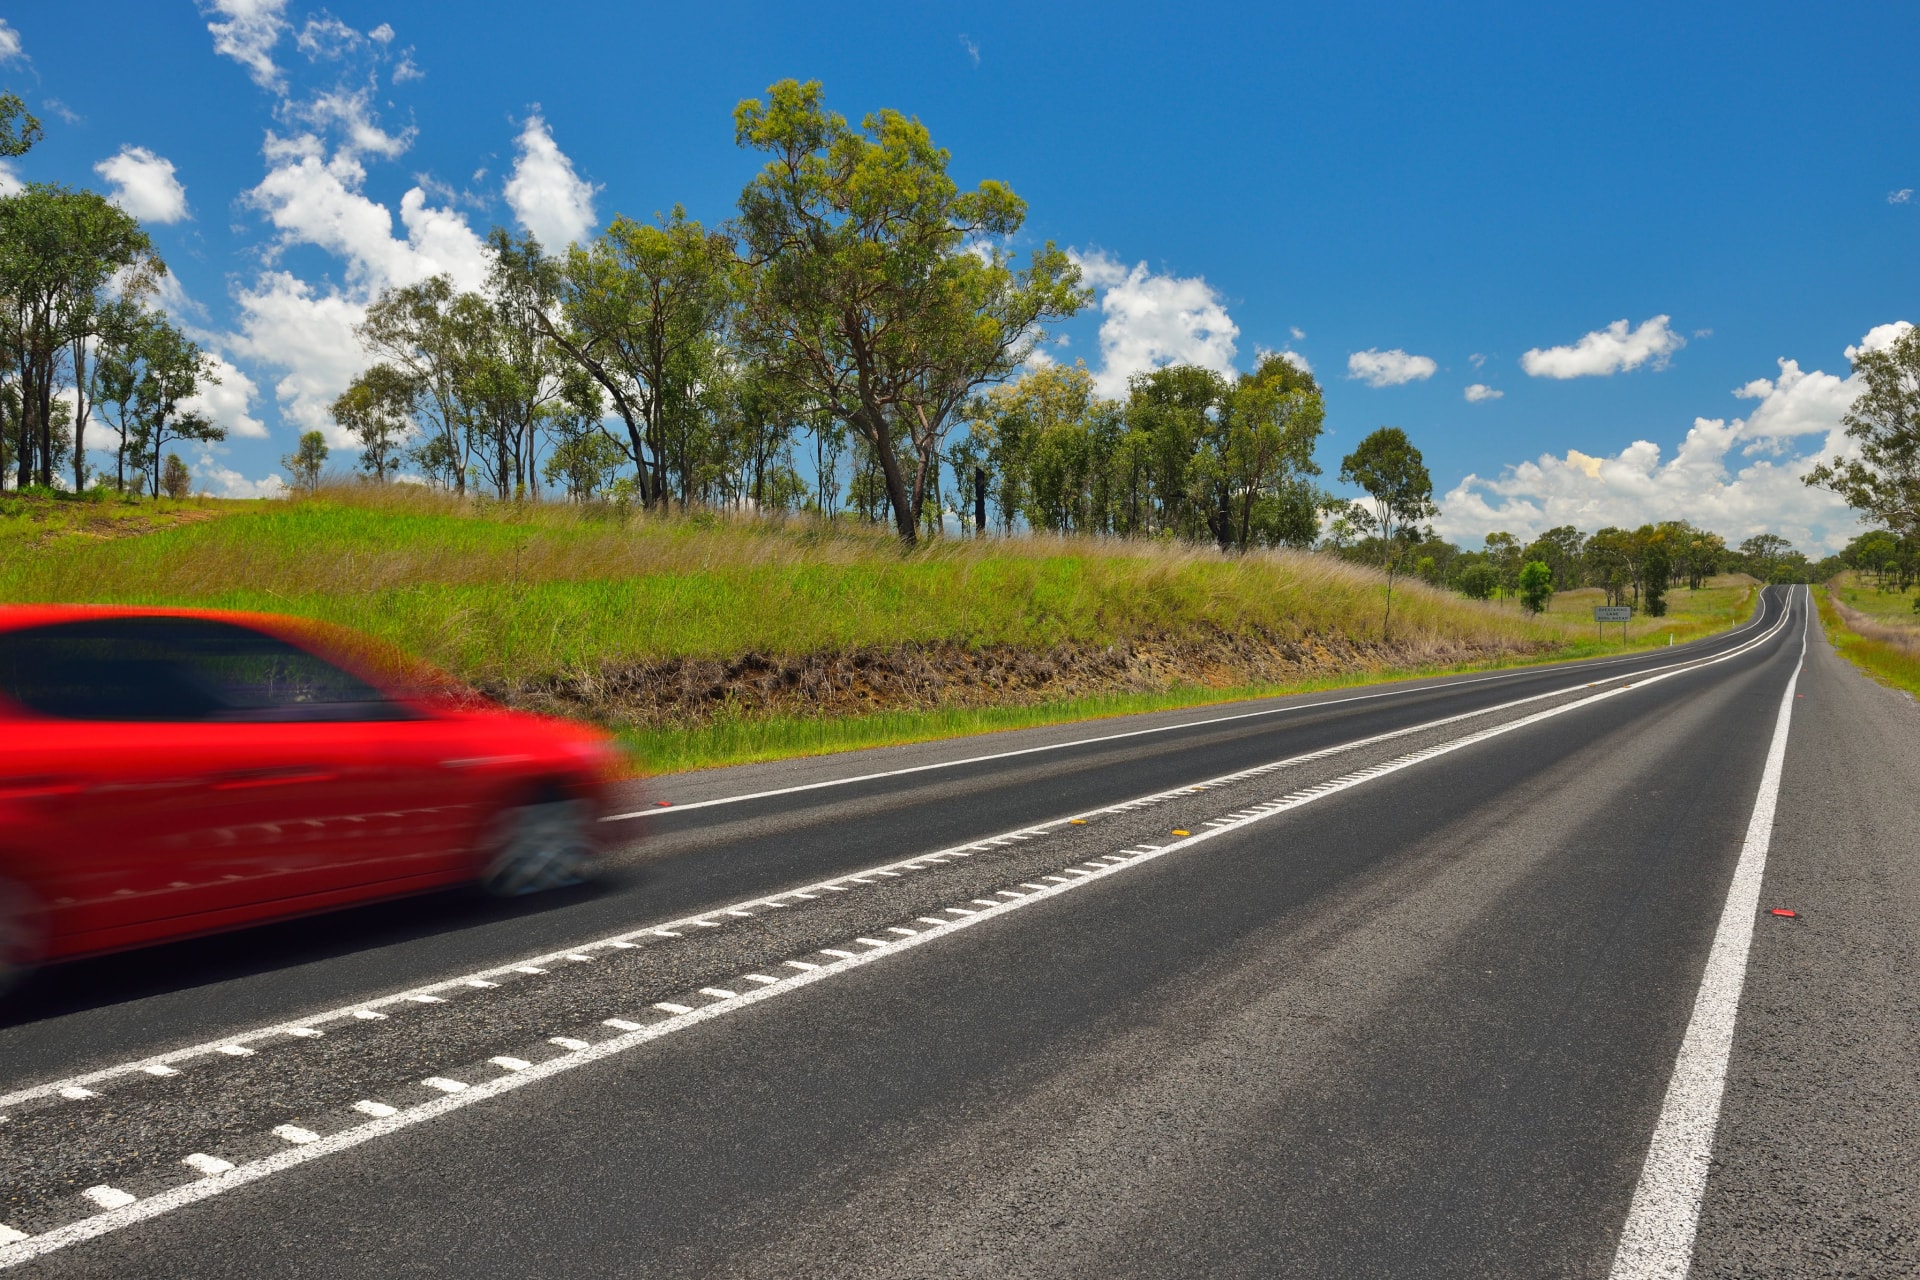 Image of a red car driving across a countryside road.